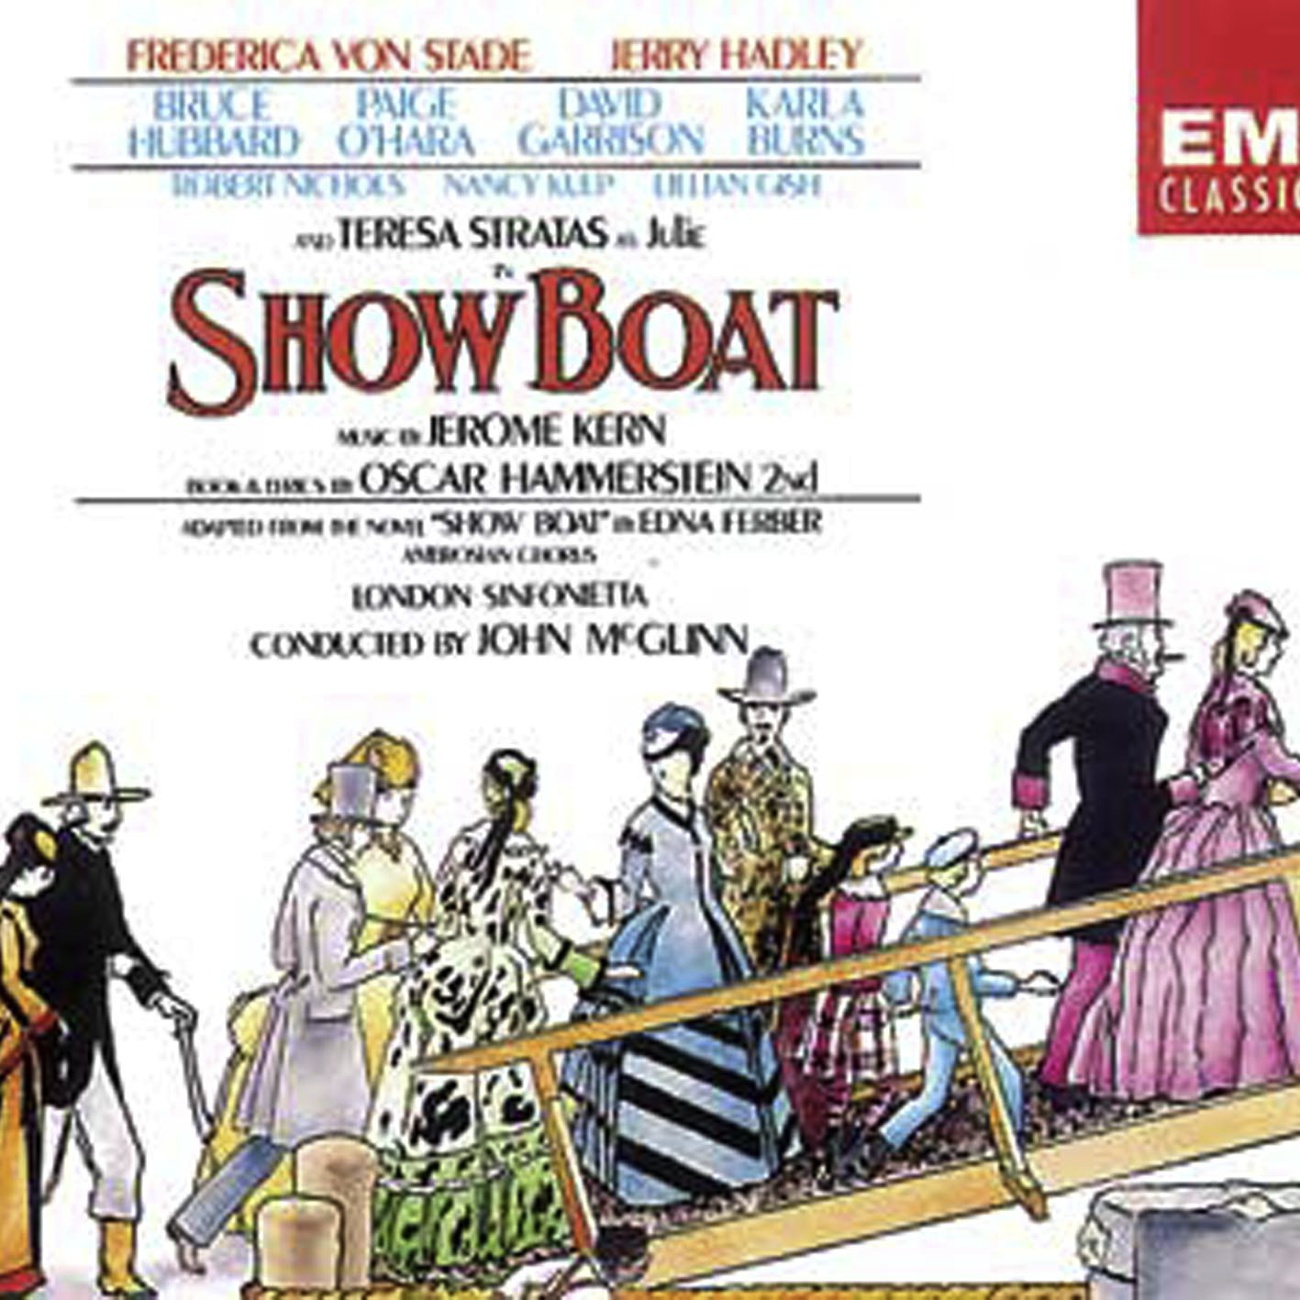 Show Boat, ACT 2, Scene 6: Goodbye, my lady love (Words and Music by Joseph E. Howard)